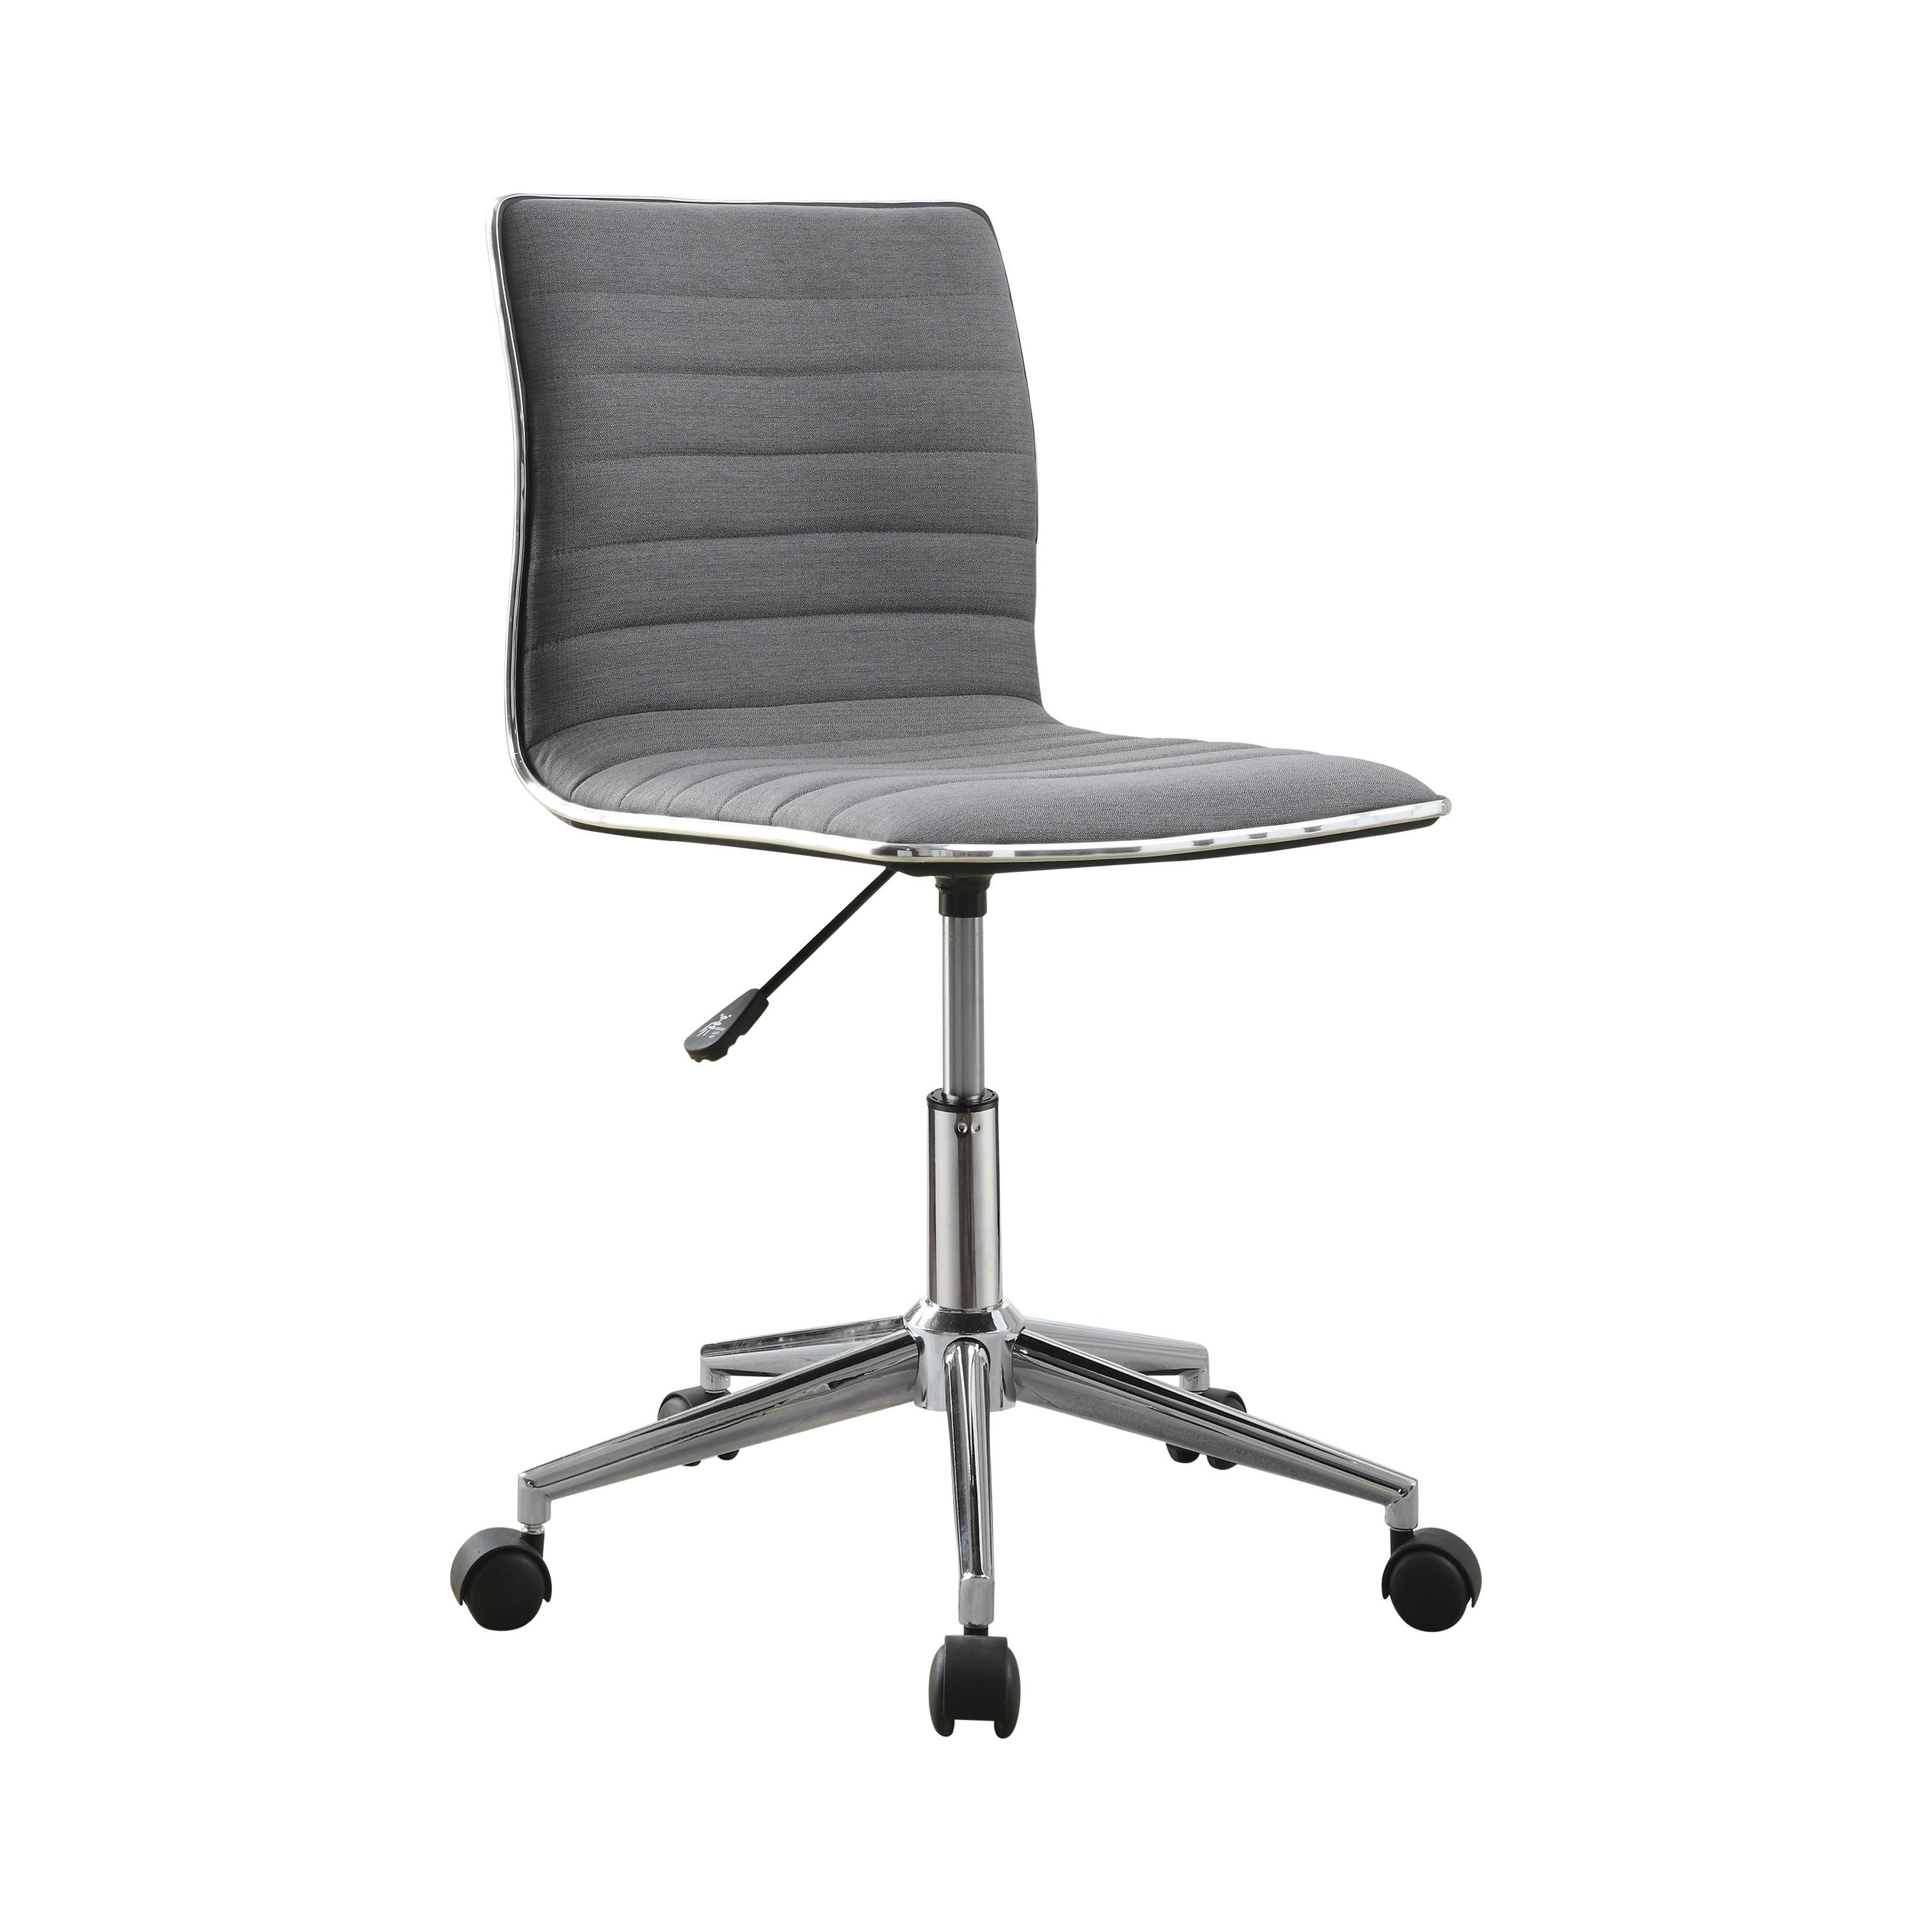 Contemporary Office Chair 800727 800727 in Gray Fabric